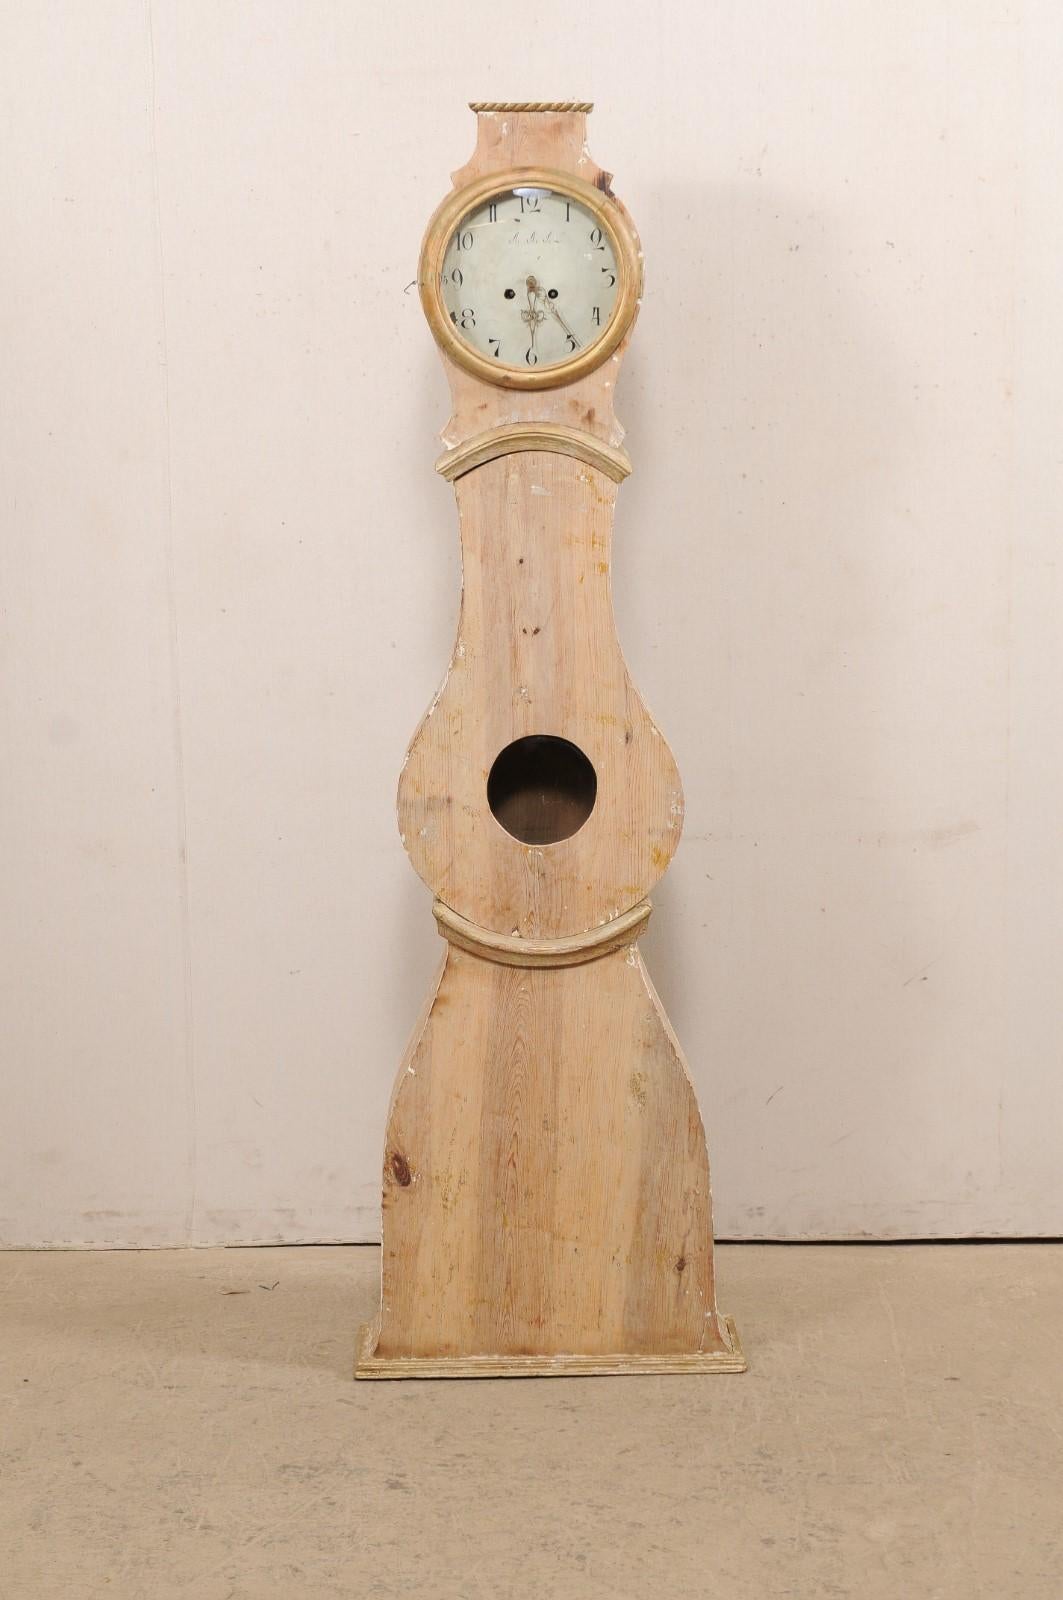 A Swedish wood carved Mora floor clock from the 19th century. This antique Mora clock from Sweden features a raised and flattened top bonnet, trimmed in rope-carved trim adorning it's head, a raindrop-shaped door and belly, rounded-triangular lower